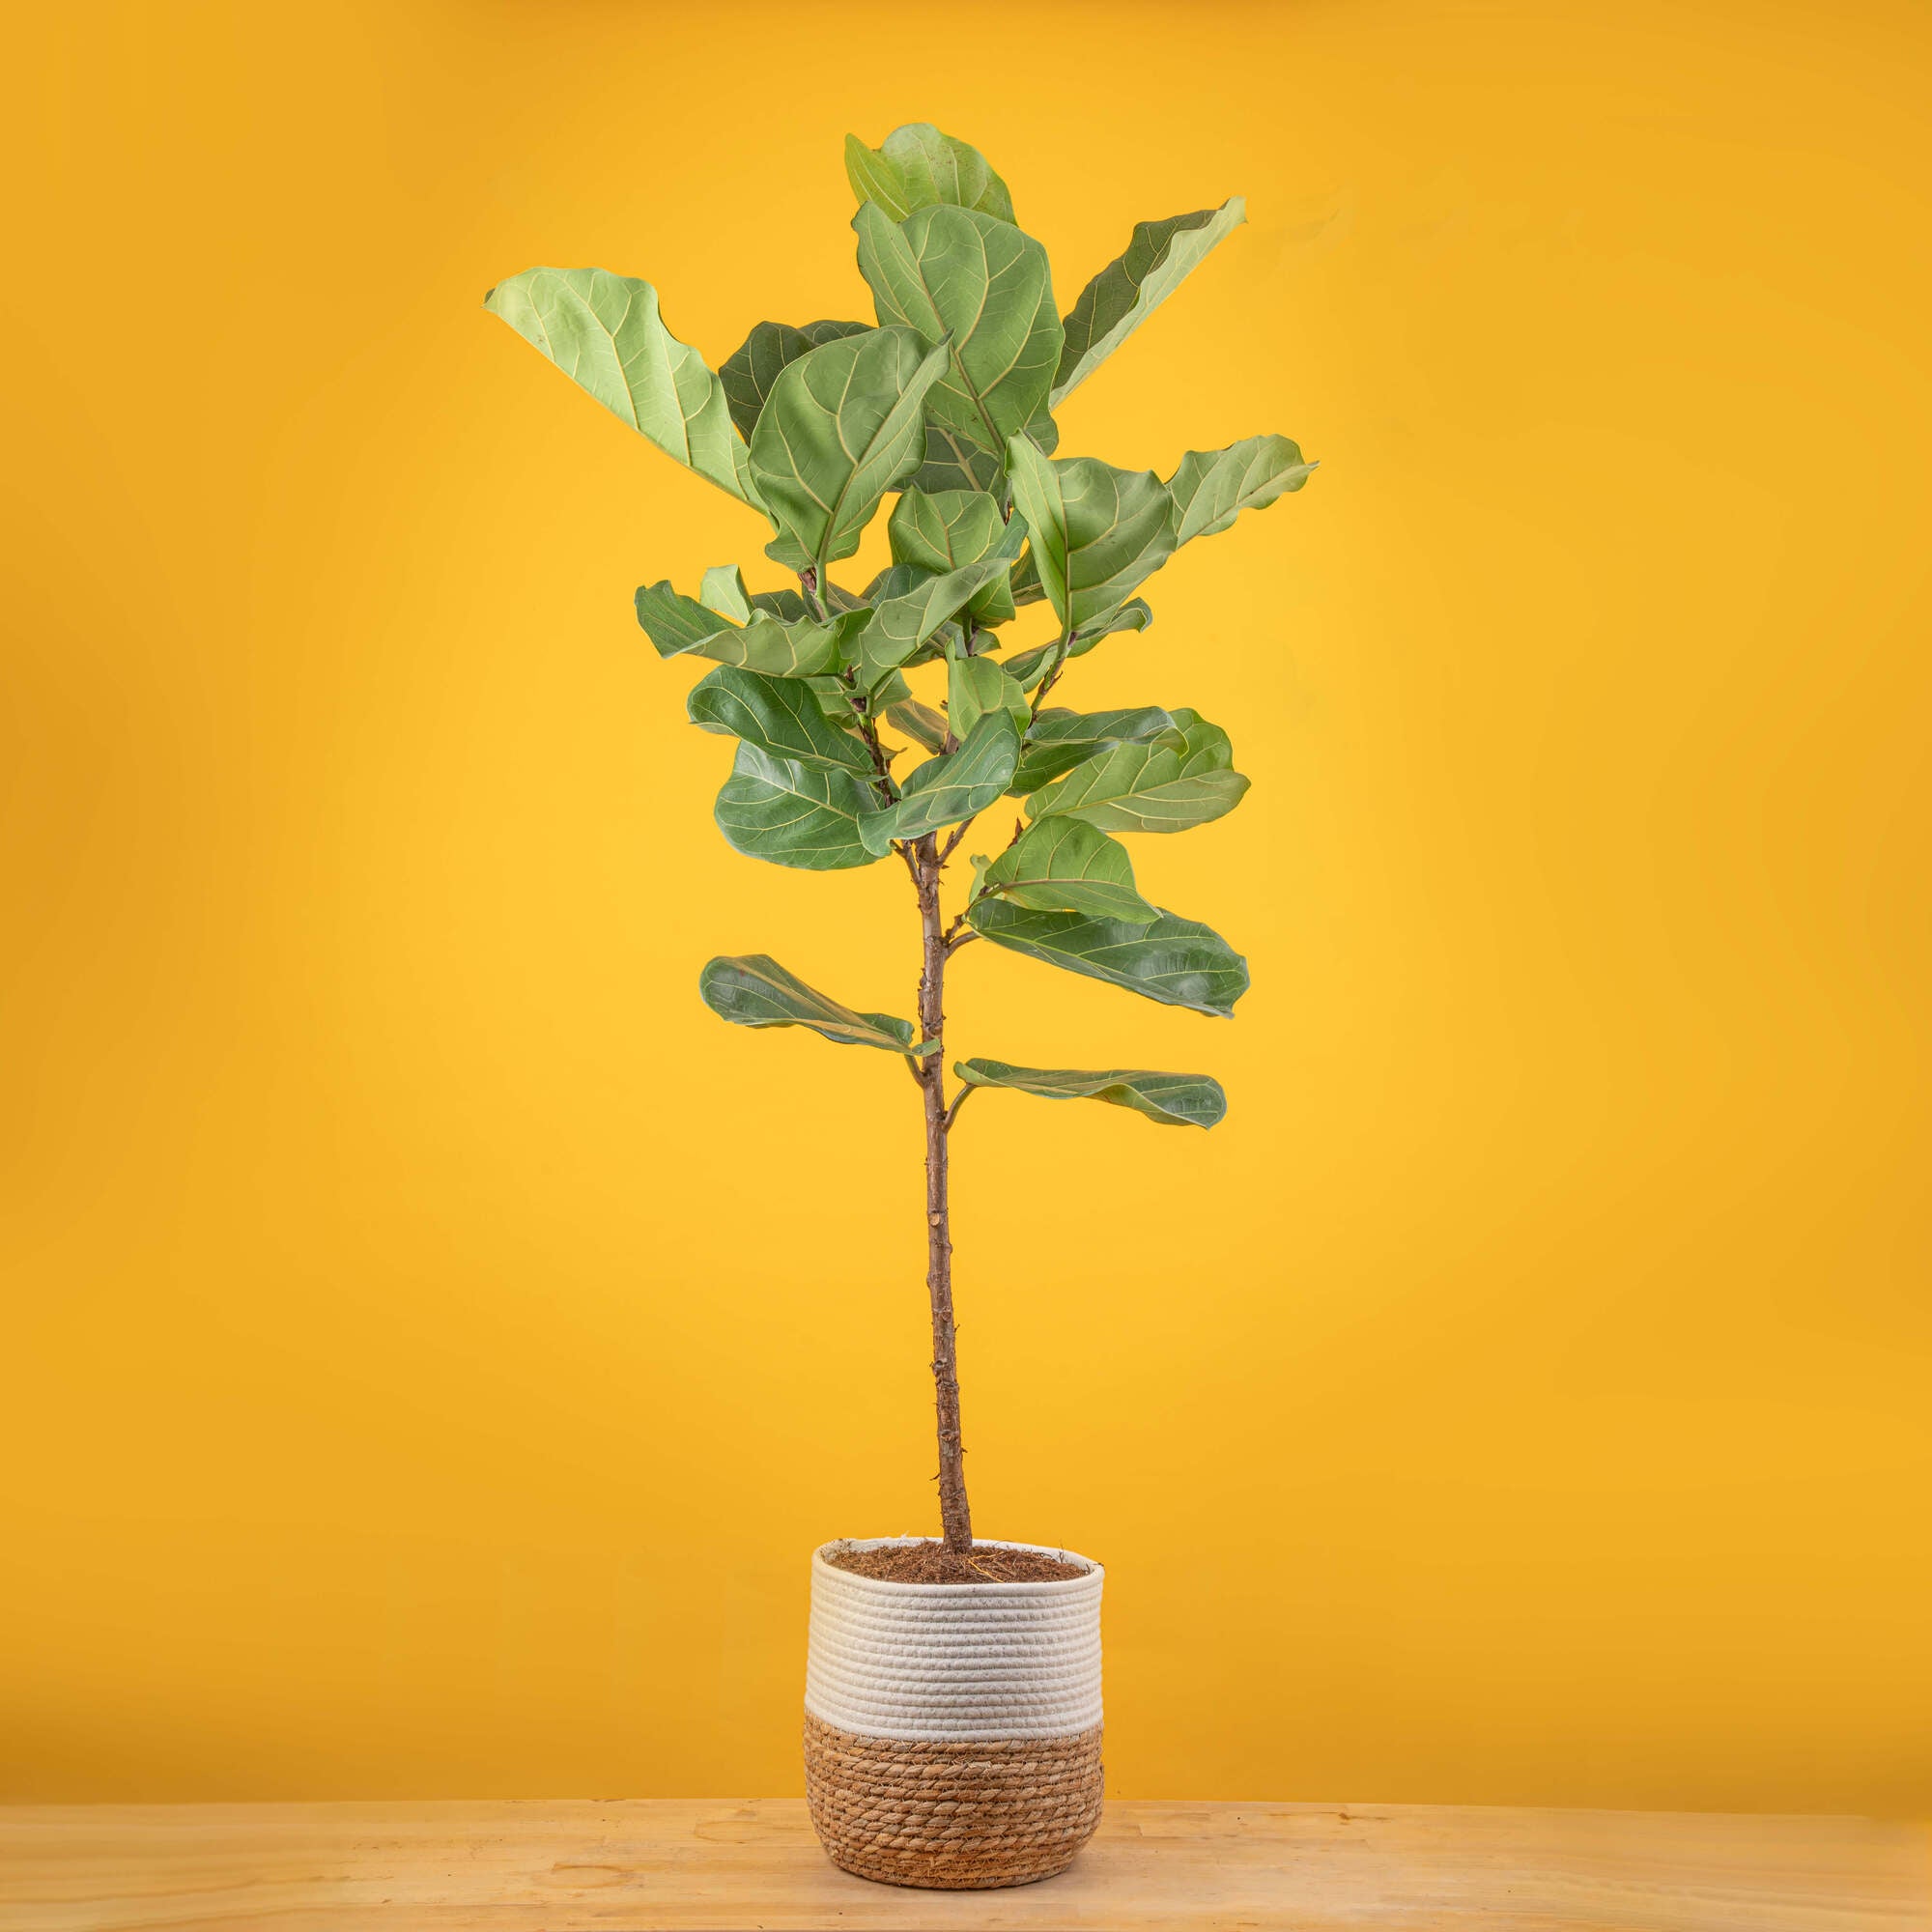 large ficus lyrata standard in white and modern planter, the planter is on a wooden stand and its set against a bright yellow background